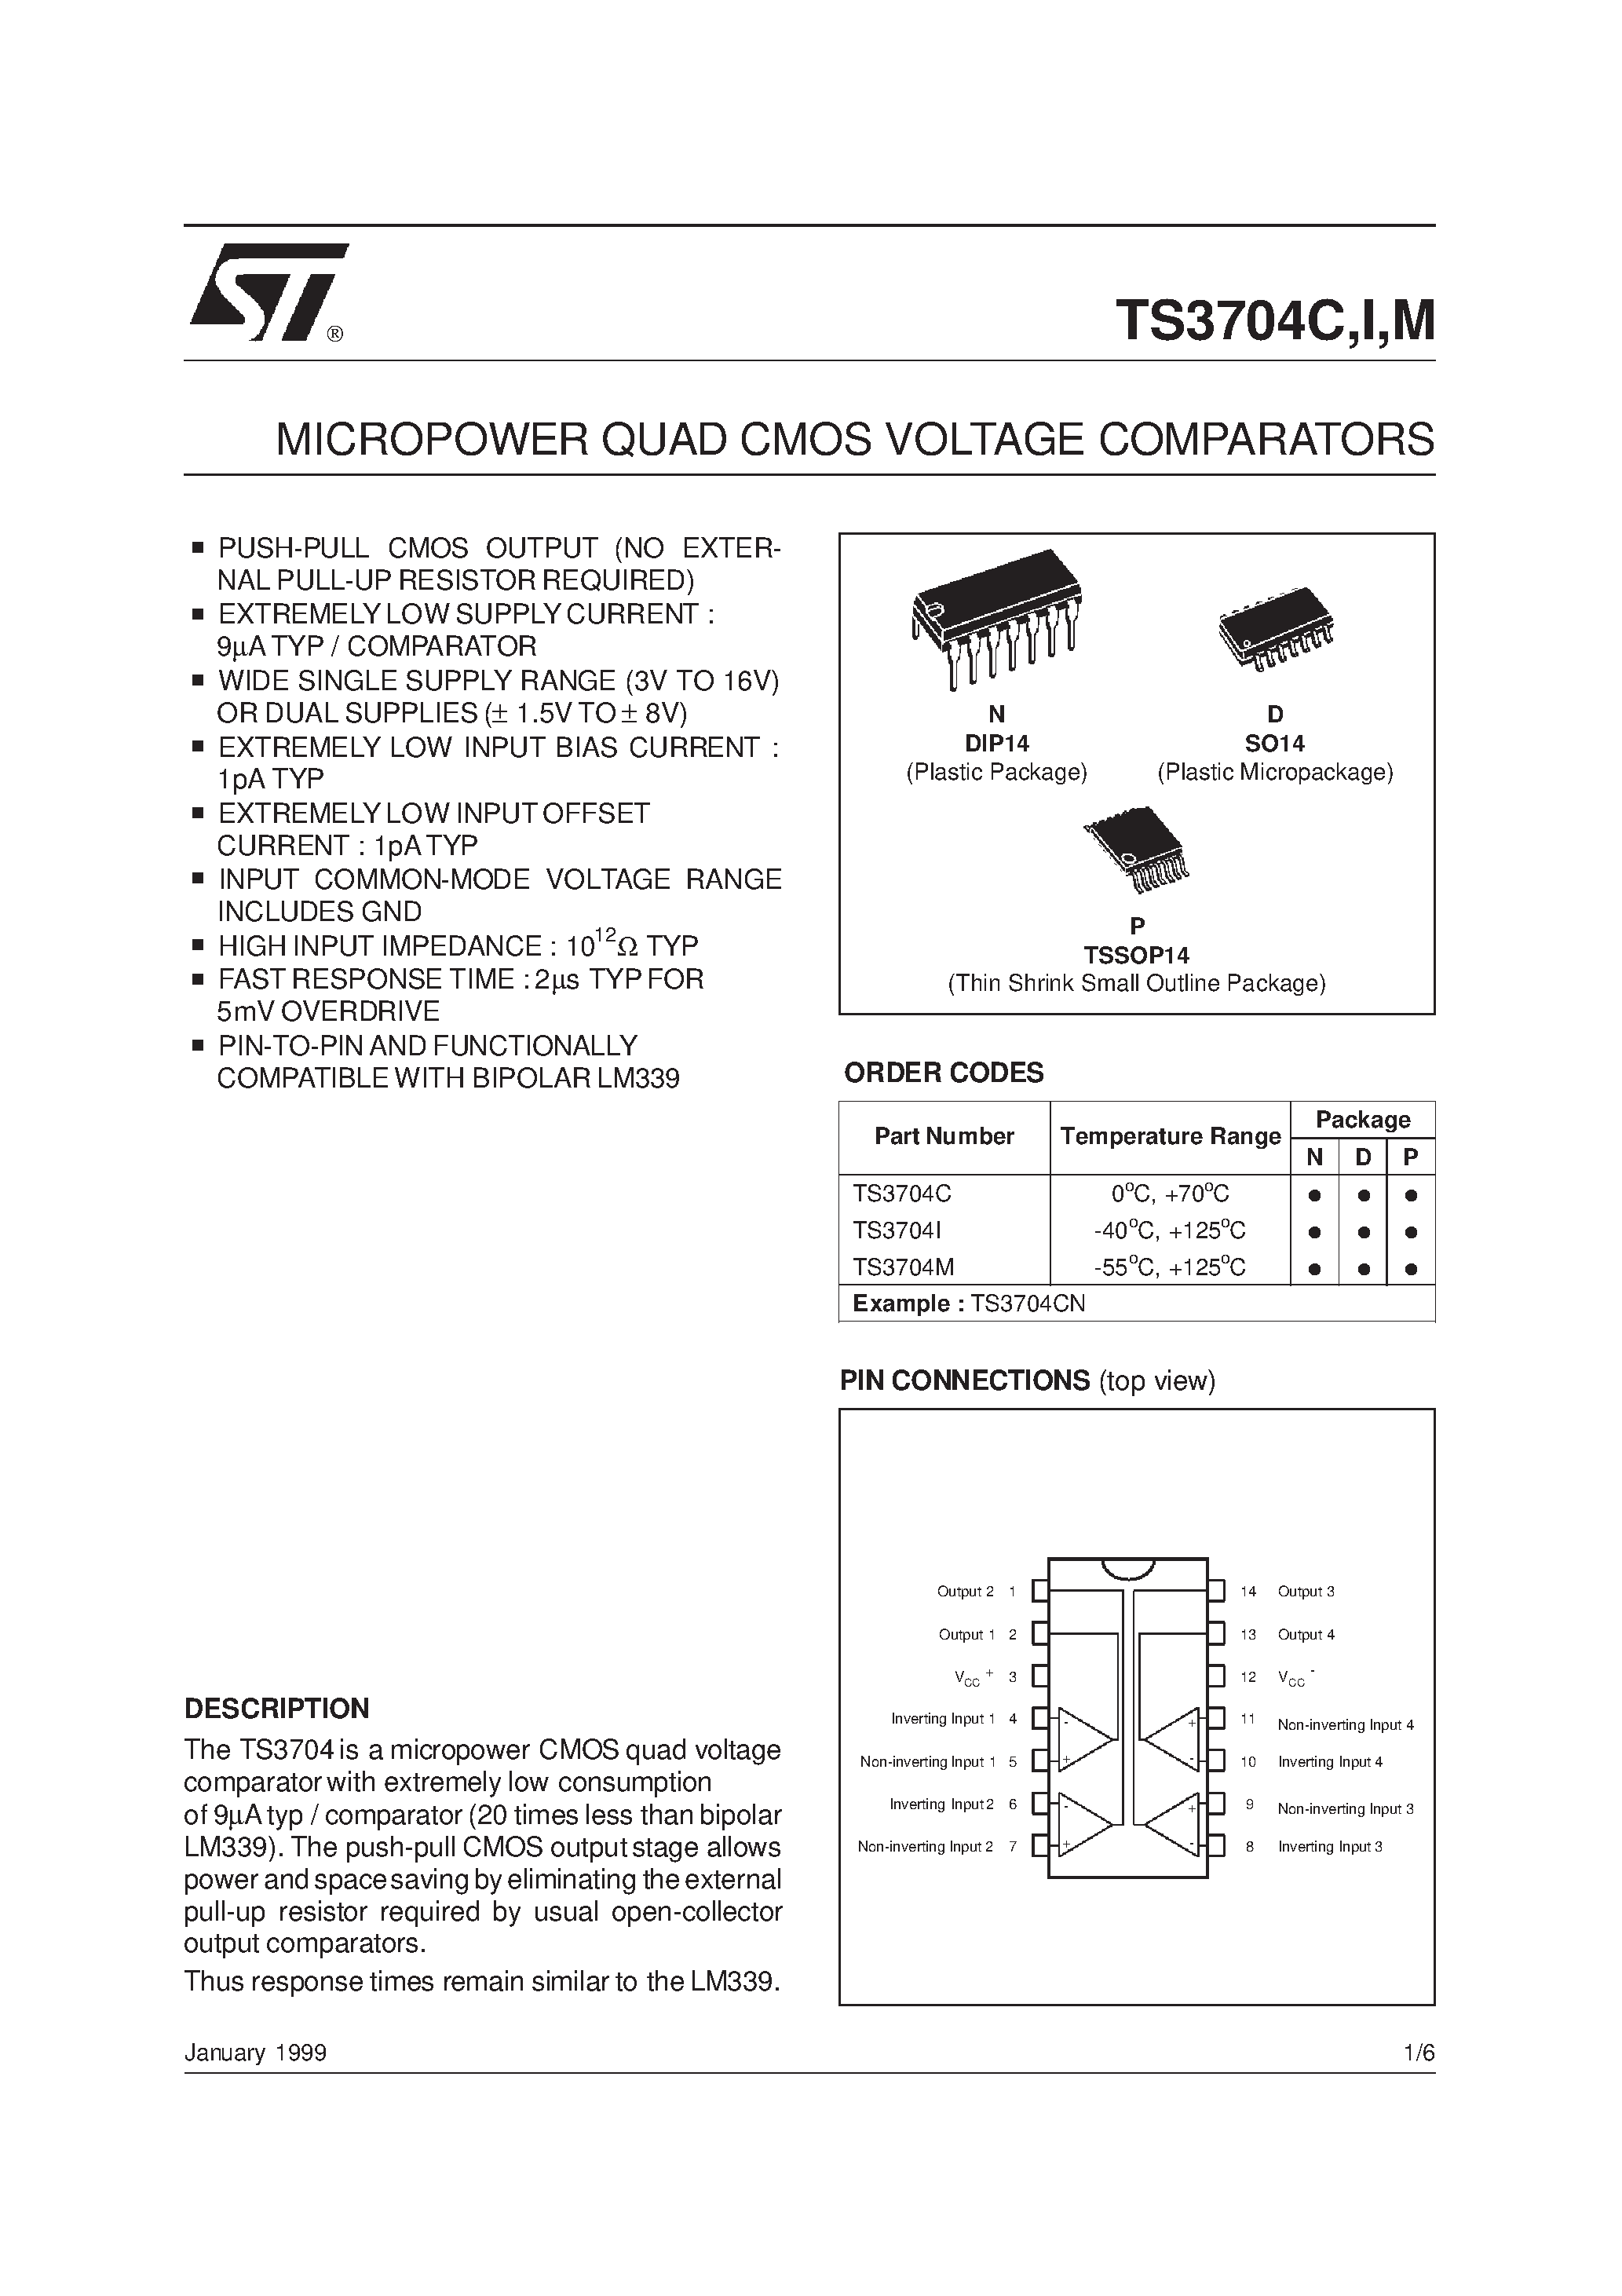 Datasheet TS3704I - MICROPOWER QUAD CMOS VOLTAGE COMPARATORS page 1